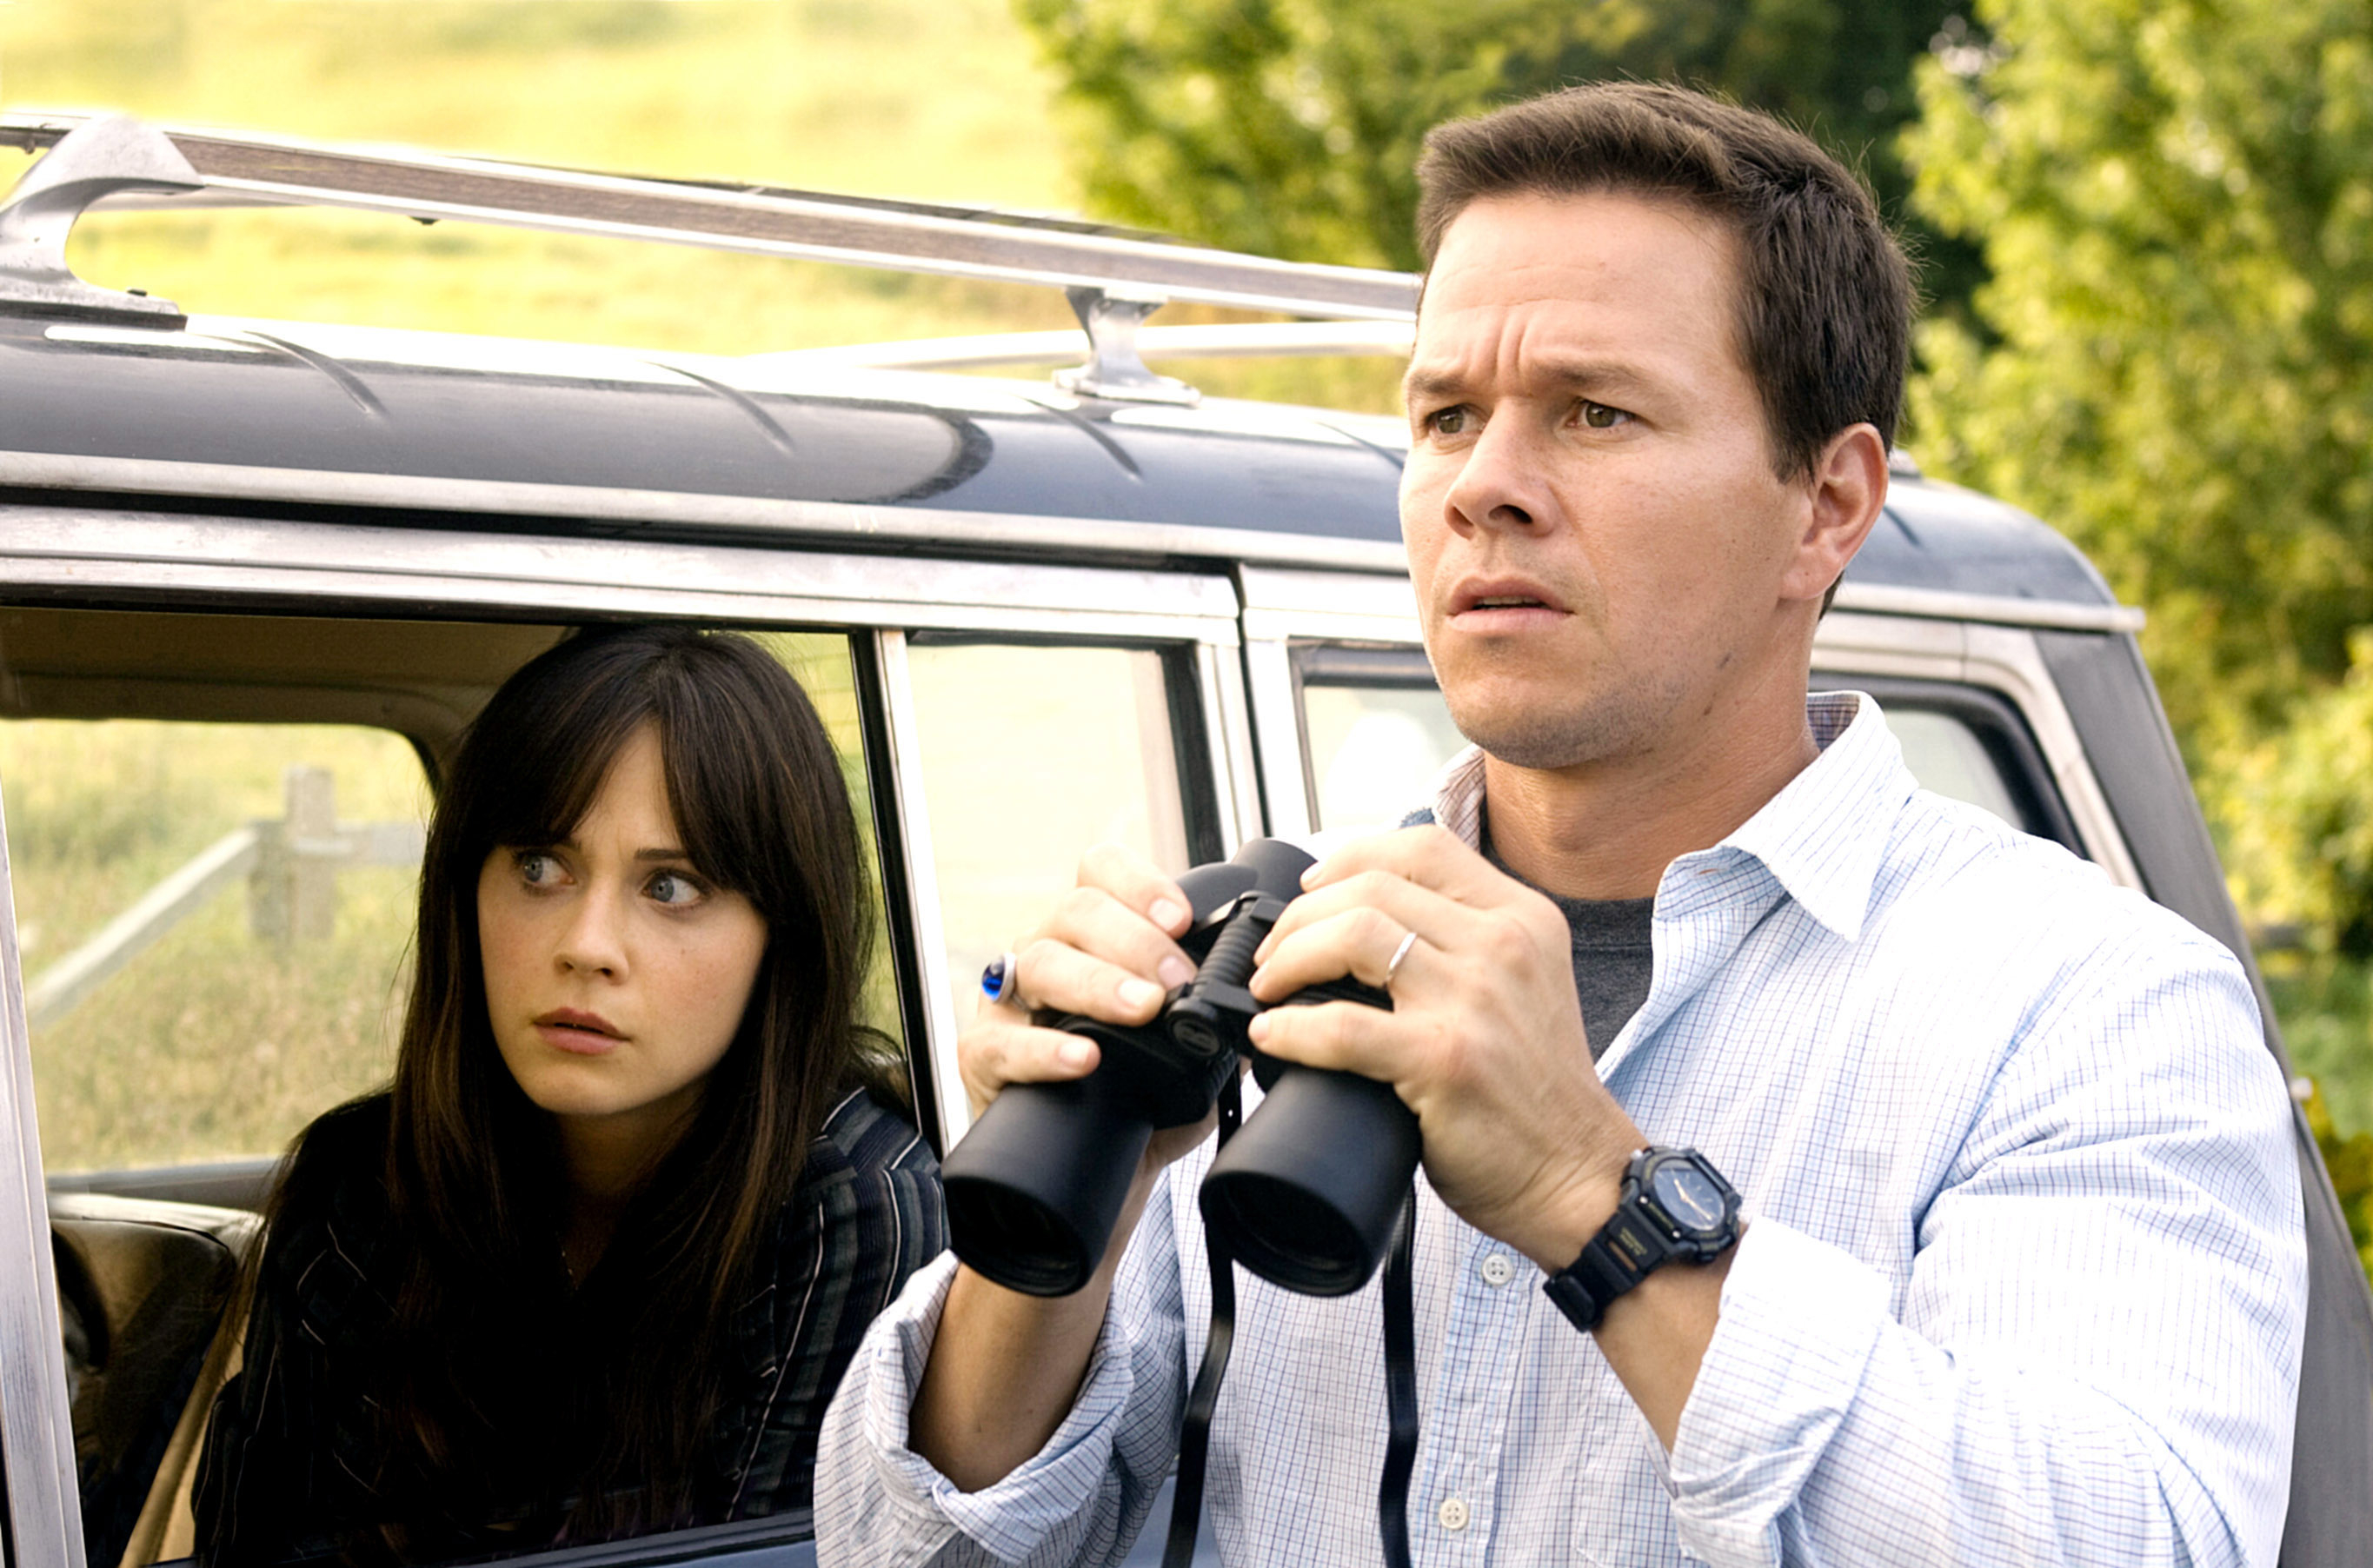 Two characters from a film, a man holding binoculars and a woman, appear focused on something off-camera from a car